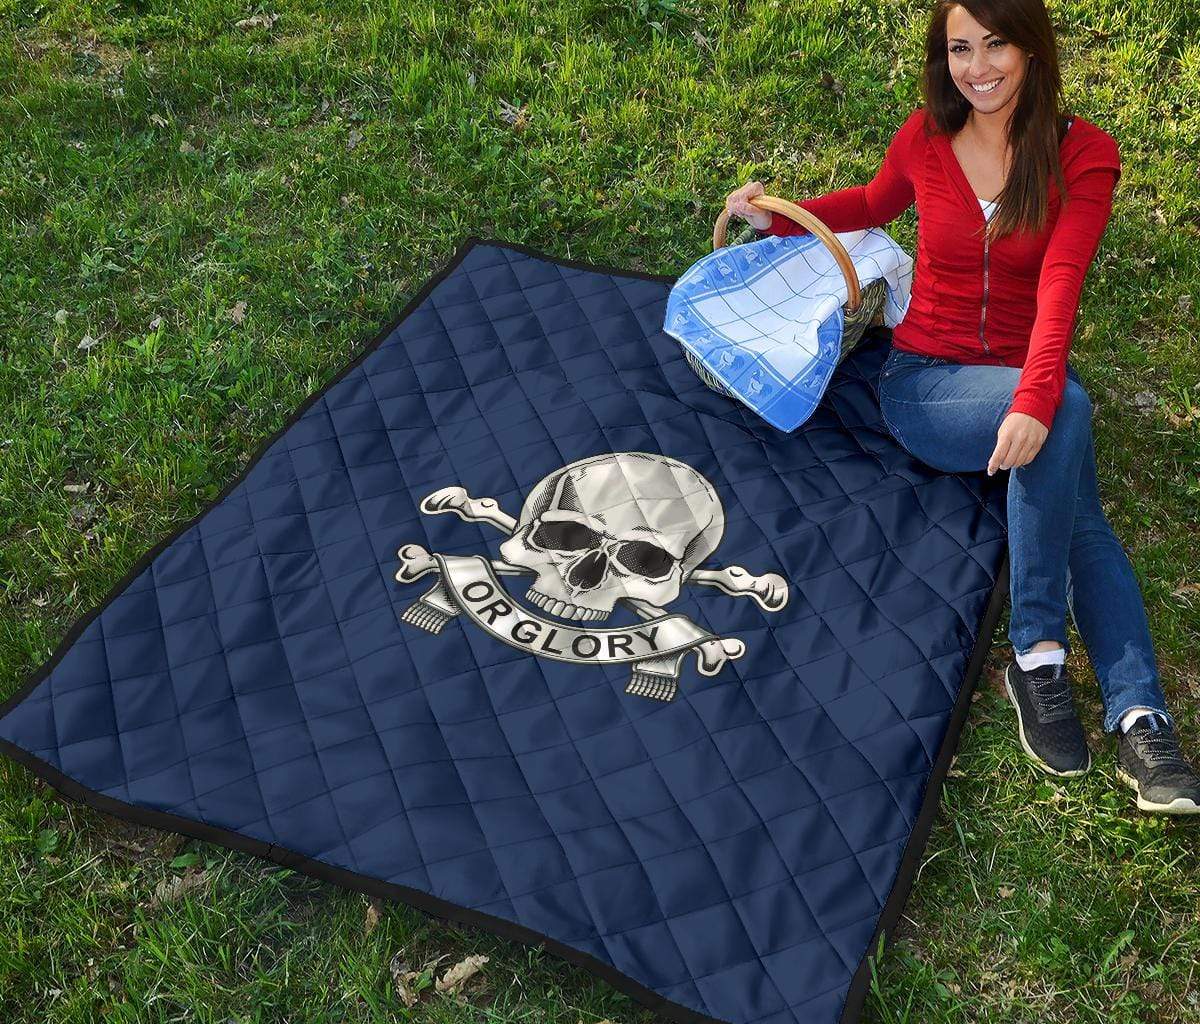 17th/21st Lancers Quilted Blanket